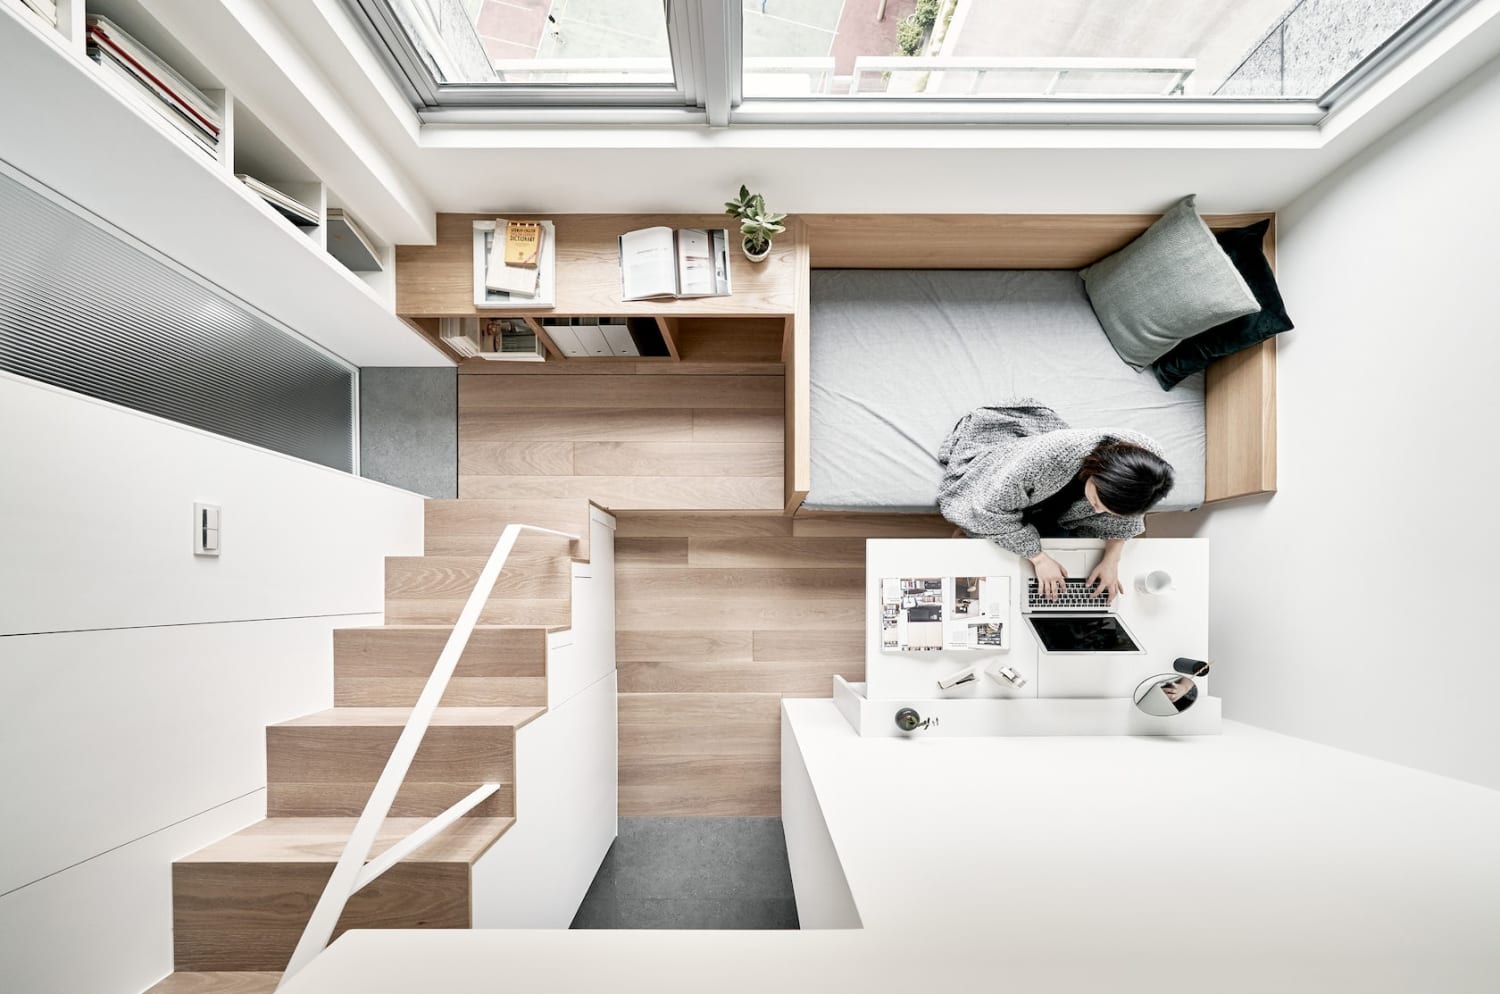 17.6-square-meter Apartment by A Little Design